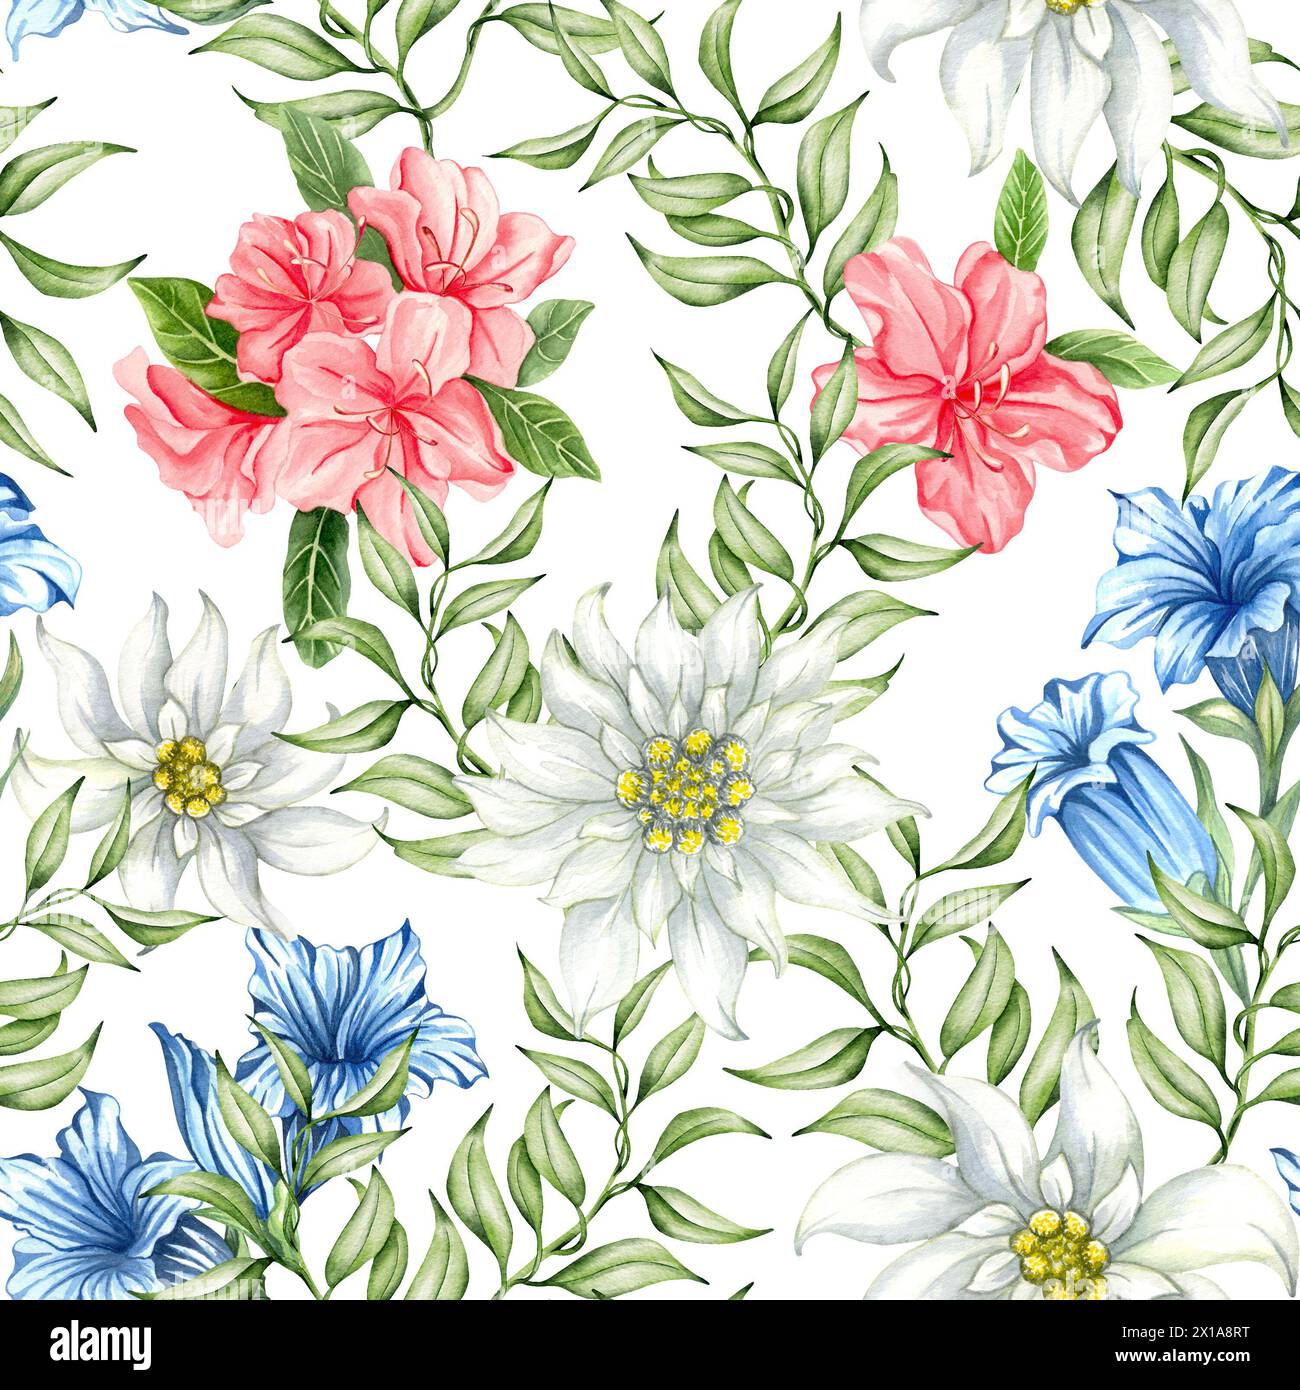 Seamless pattern with alpine flowers. Edelweise, rhododendron, gentiana. Watercolor print for textile, wallpaper, covers, surface. Blossoming Alpine m Stock Photo